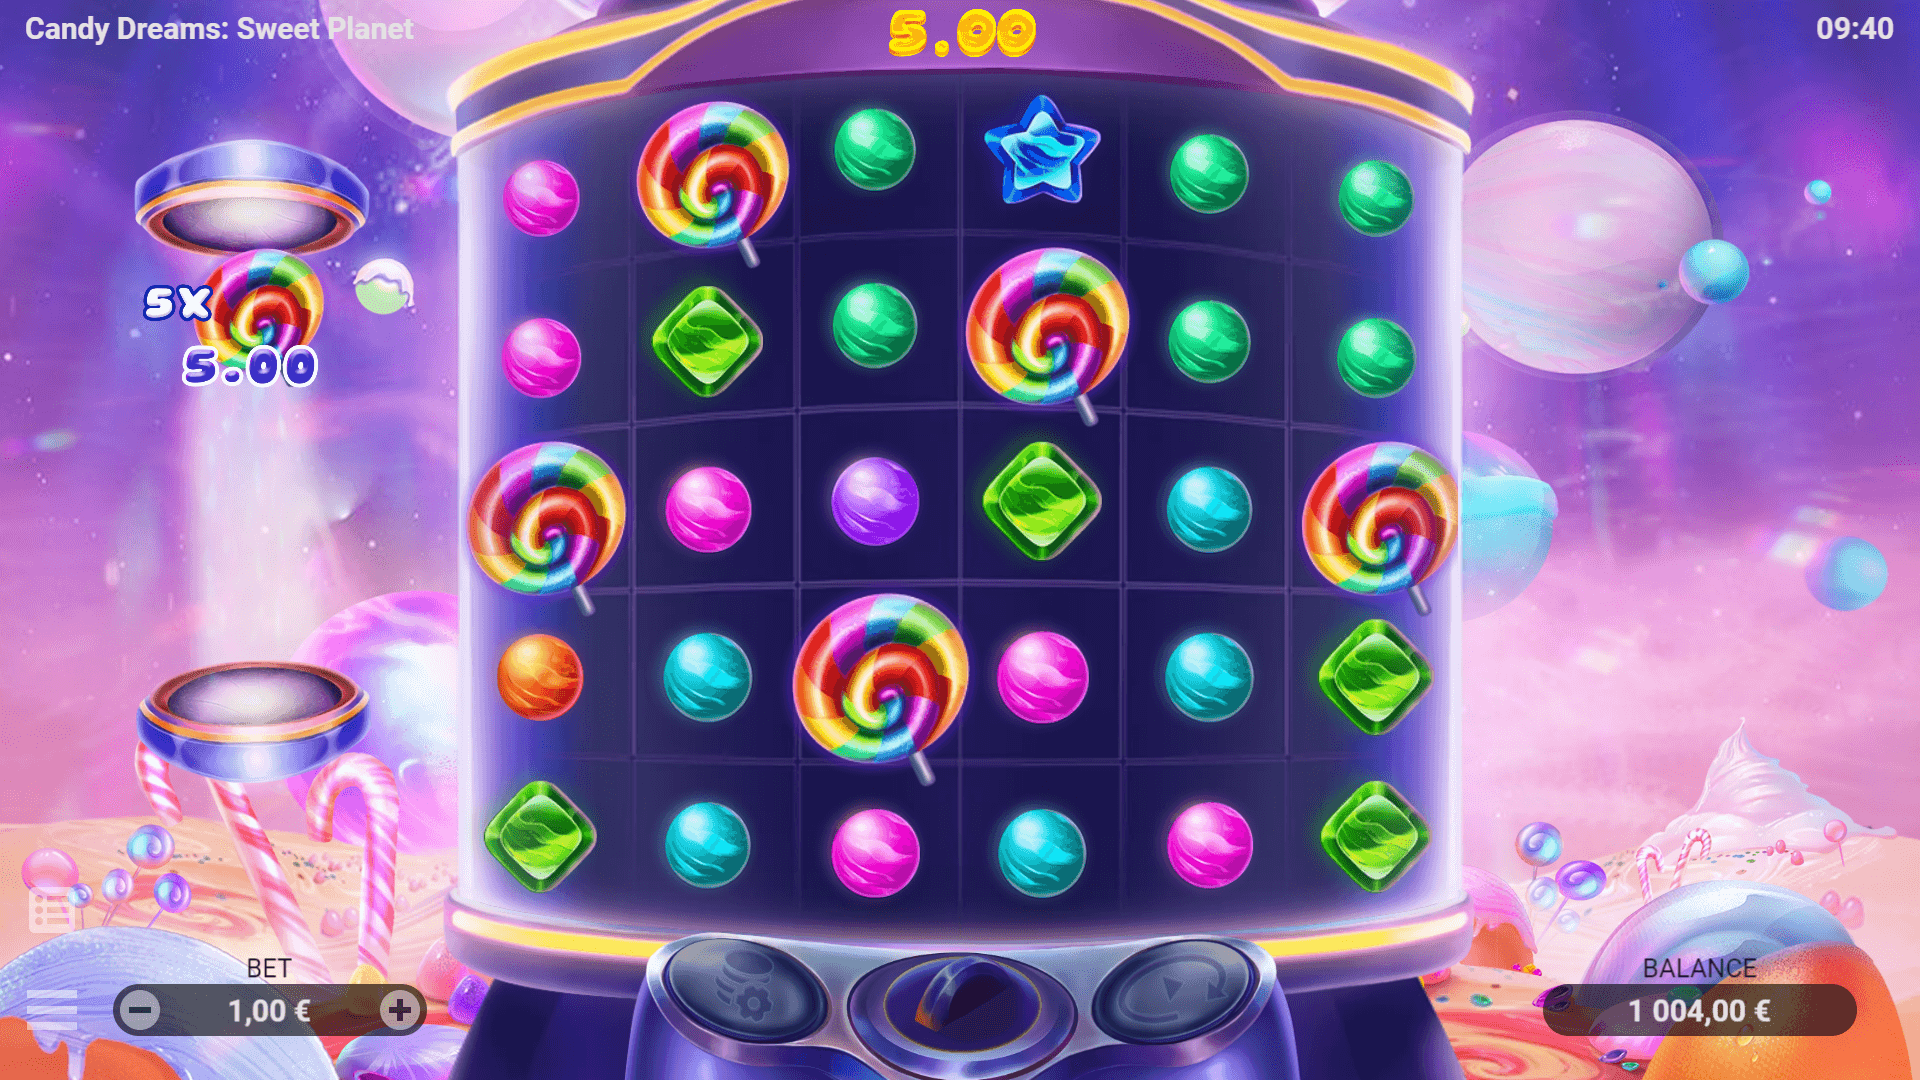 Candy Dreams Sweet Planet Evoplay PG Slot Game